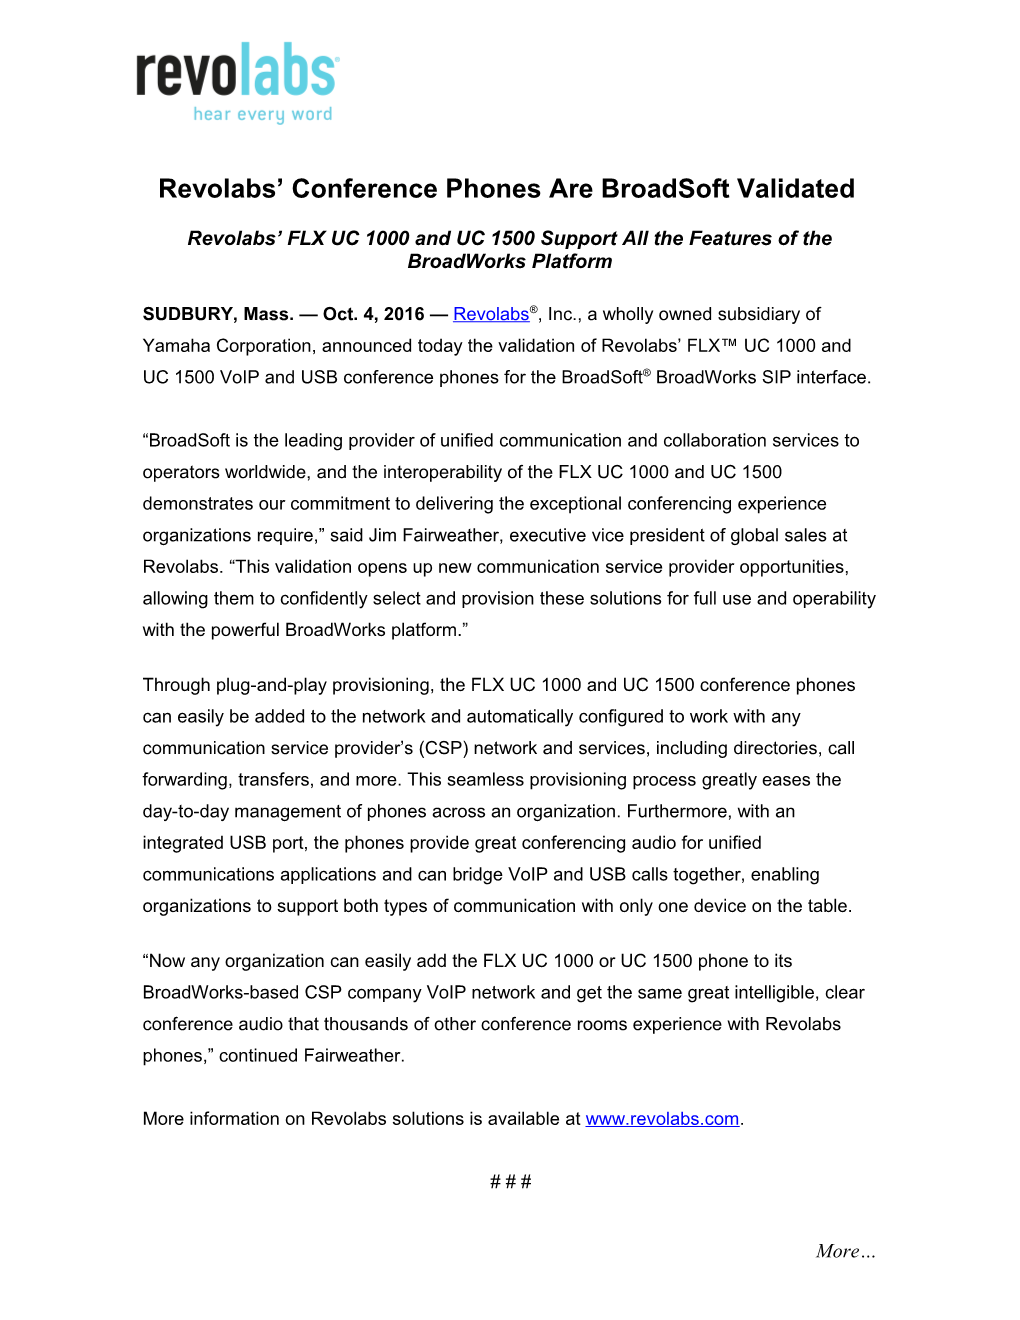 Revolabs Conference Phones Are Broadsoft Validated